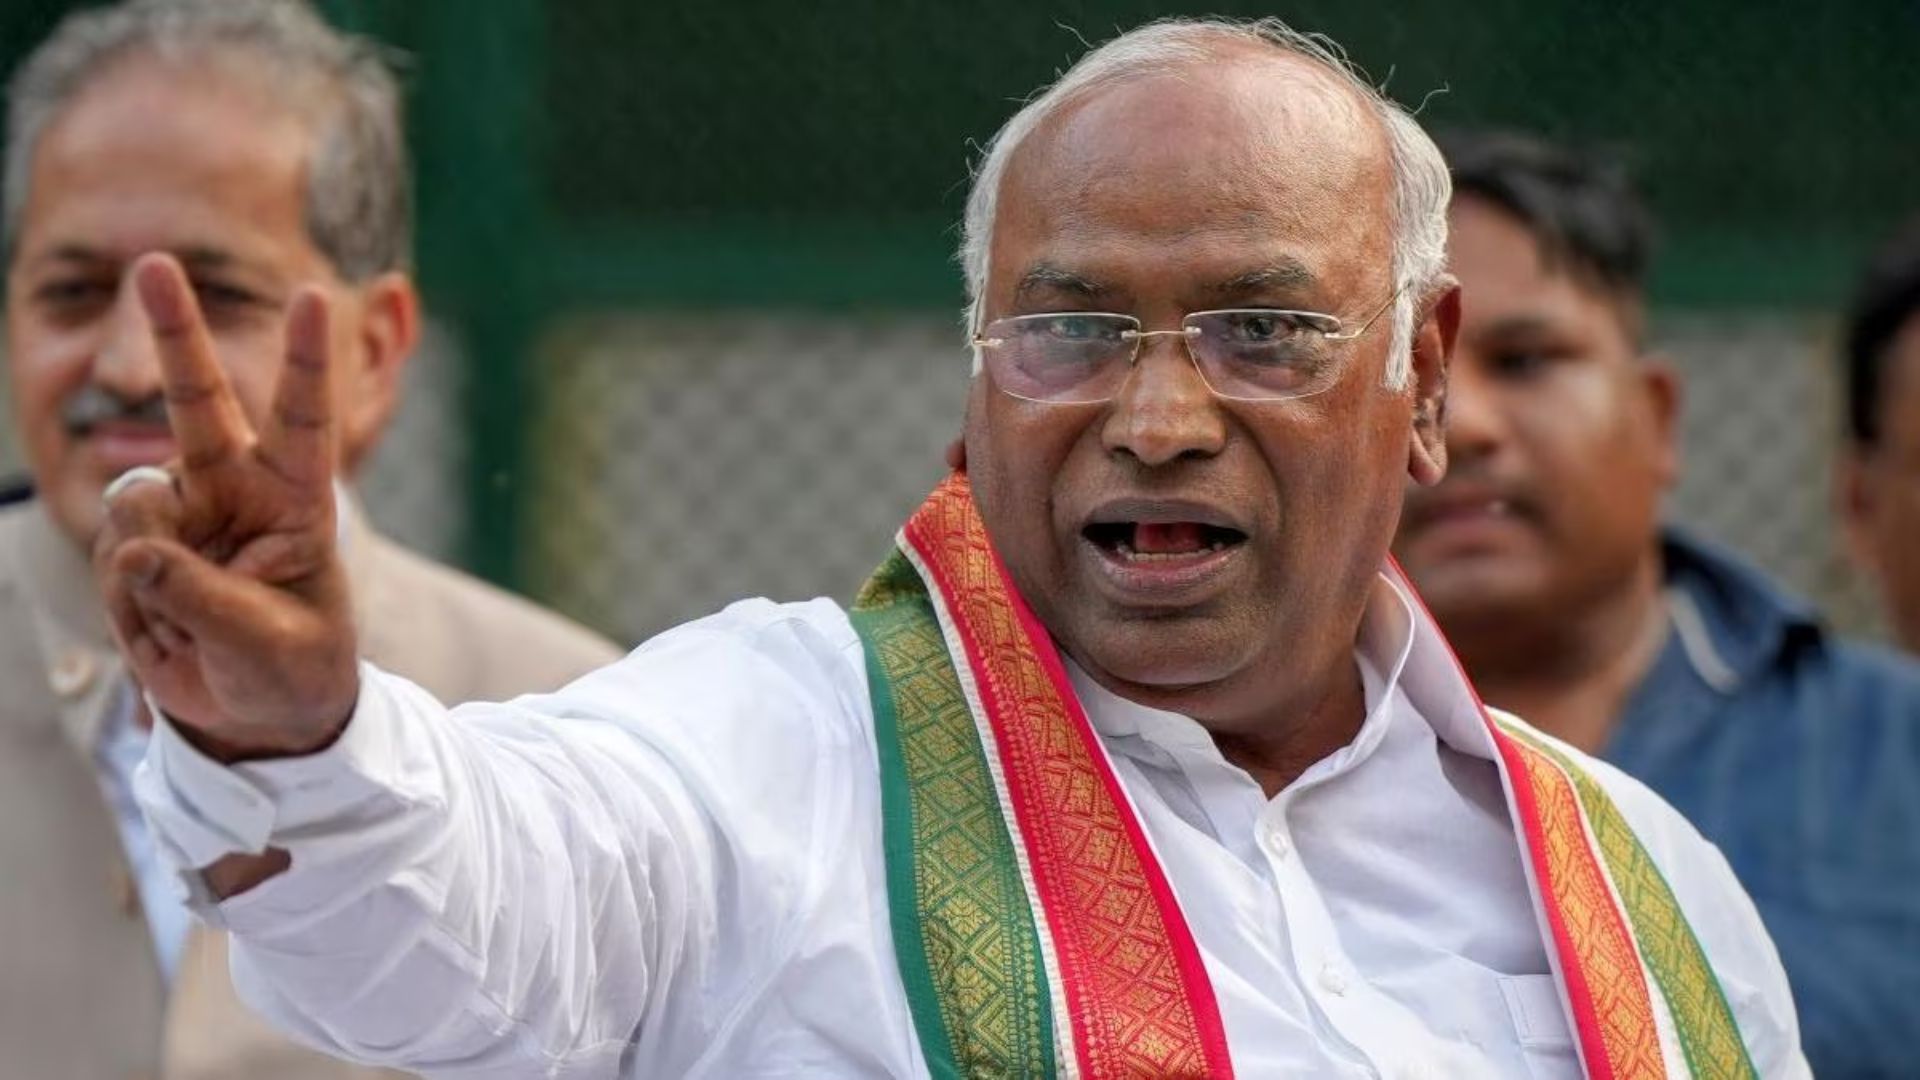 Congress President Kharge Calls Lok Sabha Results A “Moral and Political Defeat” For PM Modi